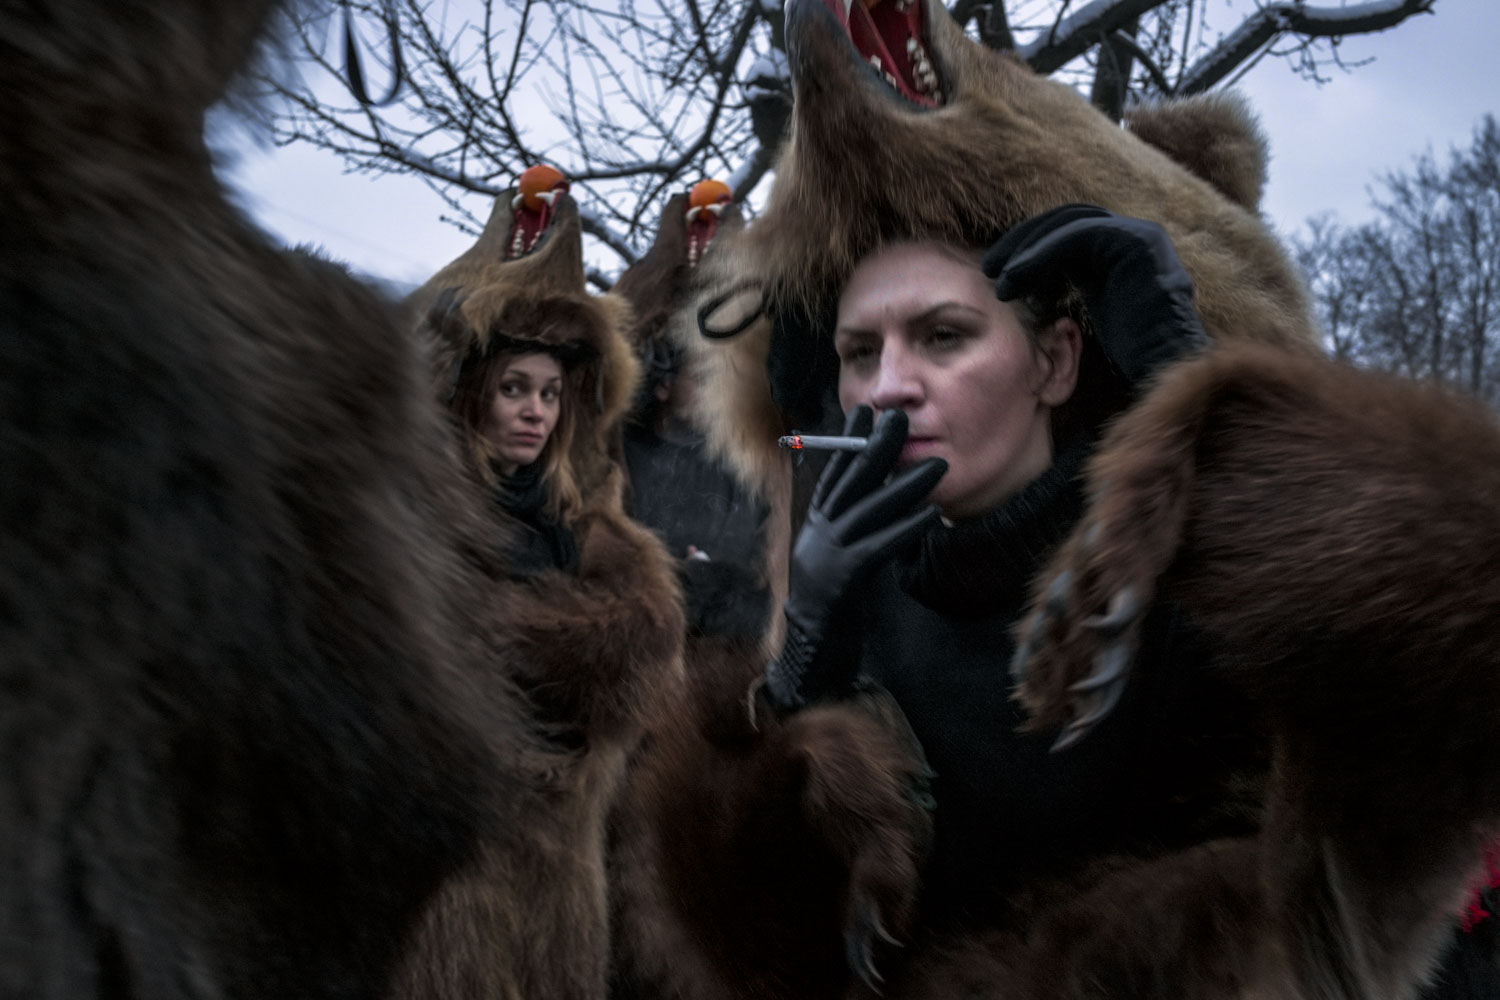  Troupes of bears from nearby towns and villages gather in Moineşti during the town's annual Bear Parade. Although in the minority, lady bears can be found in nearly every troupe. December 27, 2014. Moineşti town, Bacău county, Romania. 